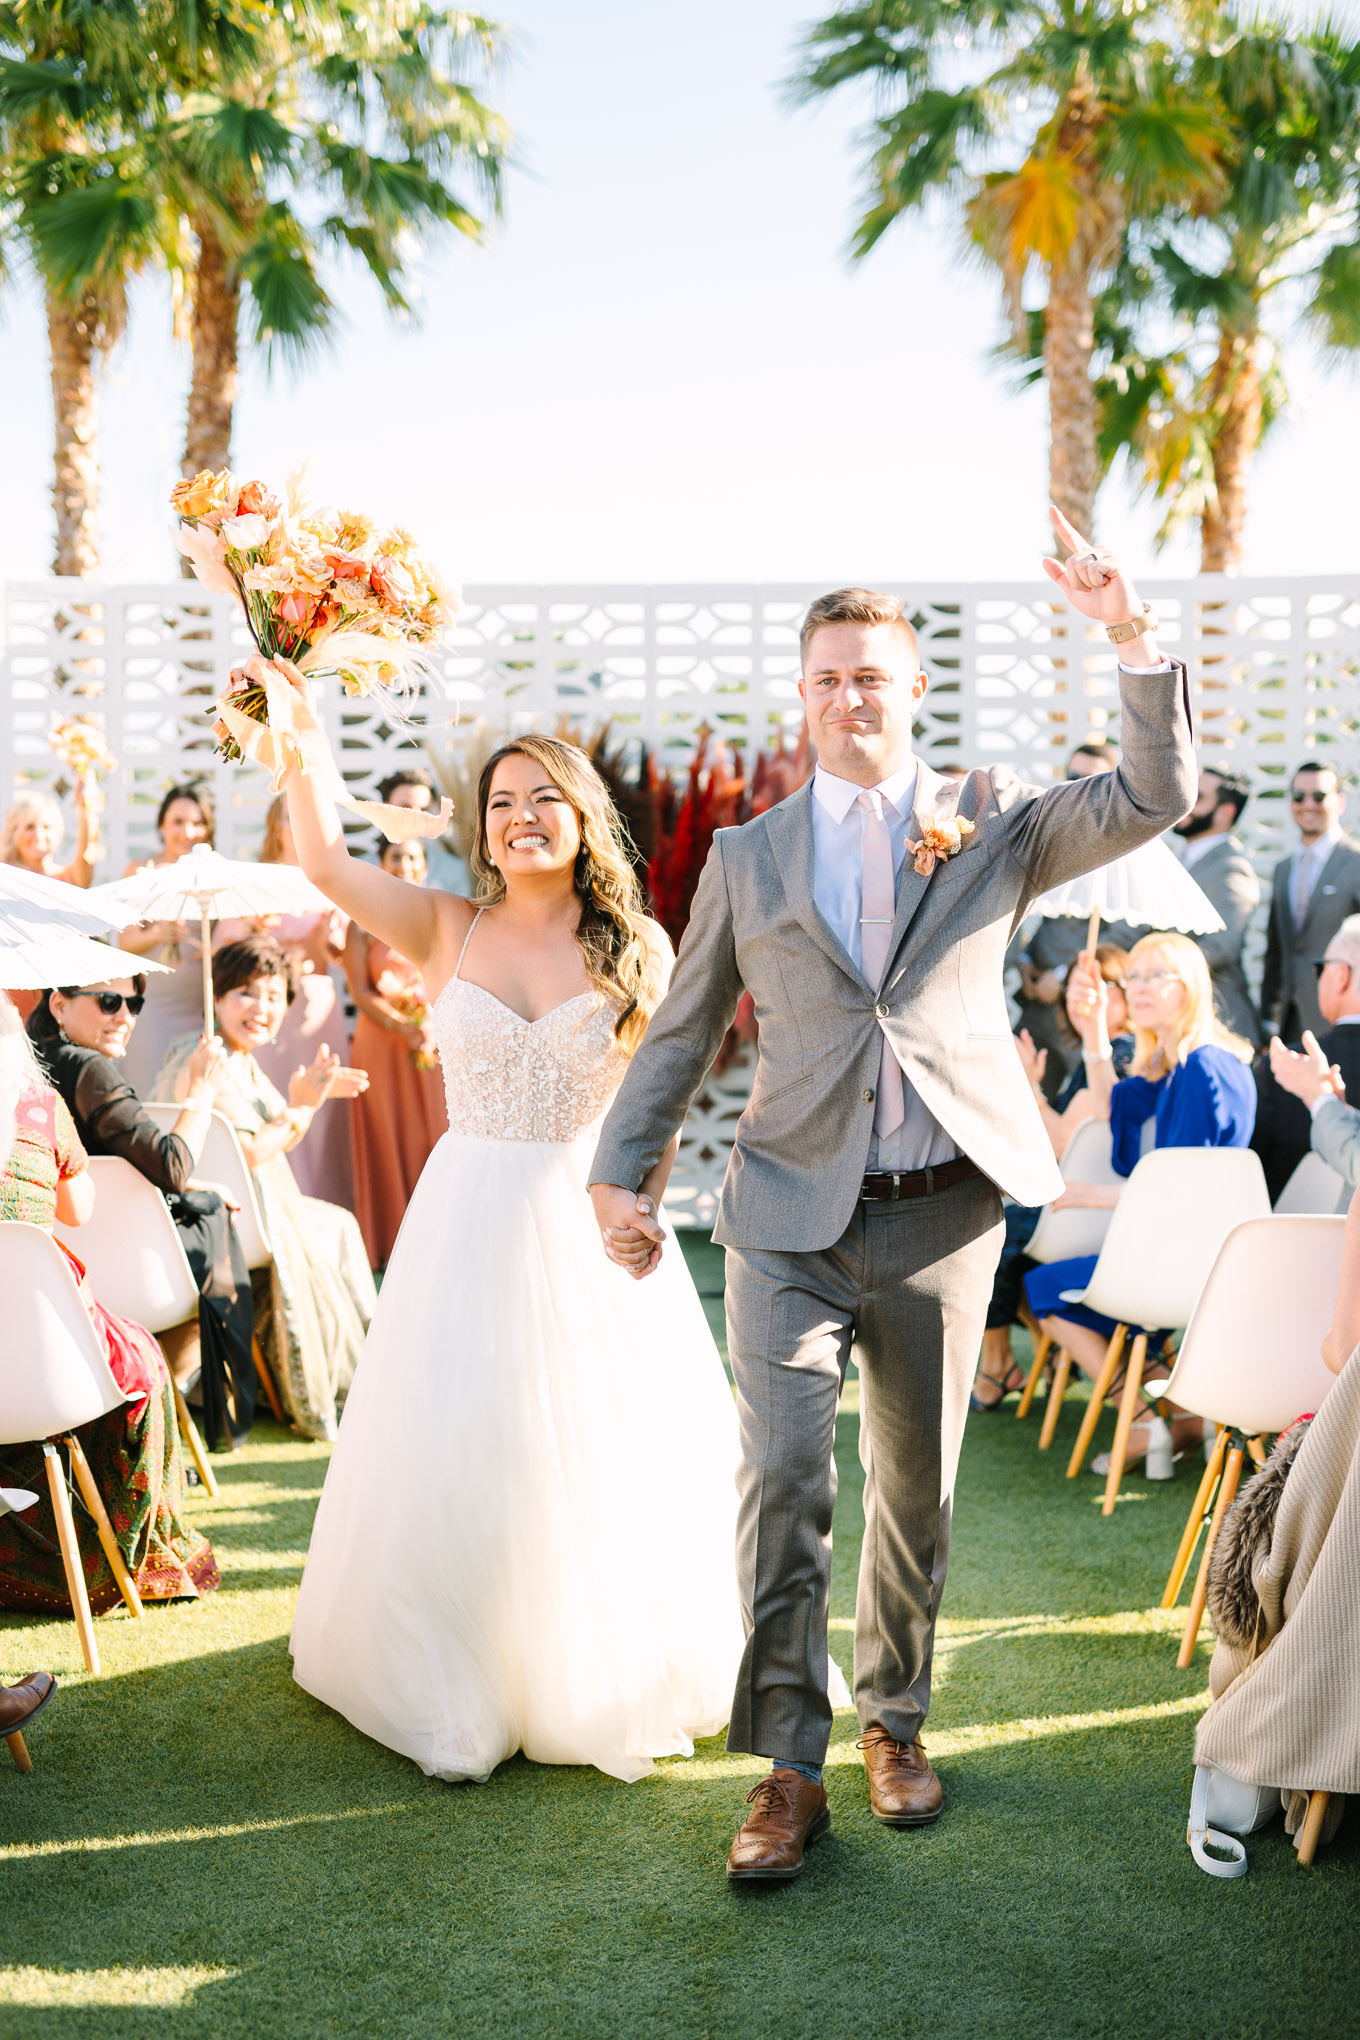 Wedding at The Lautner Compound in Palm Springs | Wedding and elopement photography roundup | Los Angeles and Palm Springs photographer | #losangeleswedding #palmspringswedding #elopementphotographer Source: Mary Costa Photography | Los Angeles